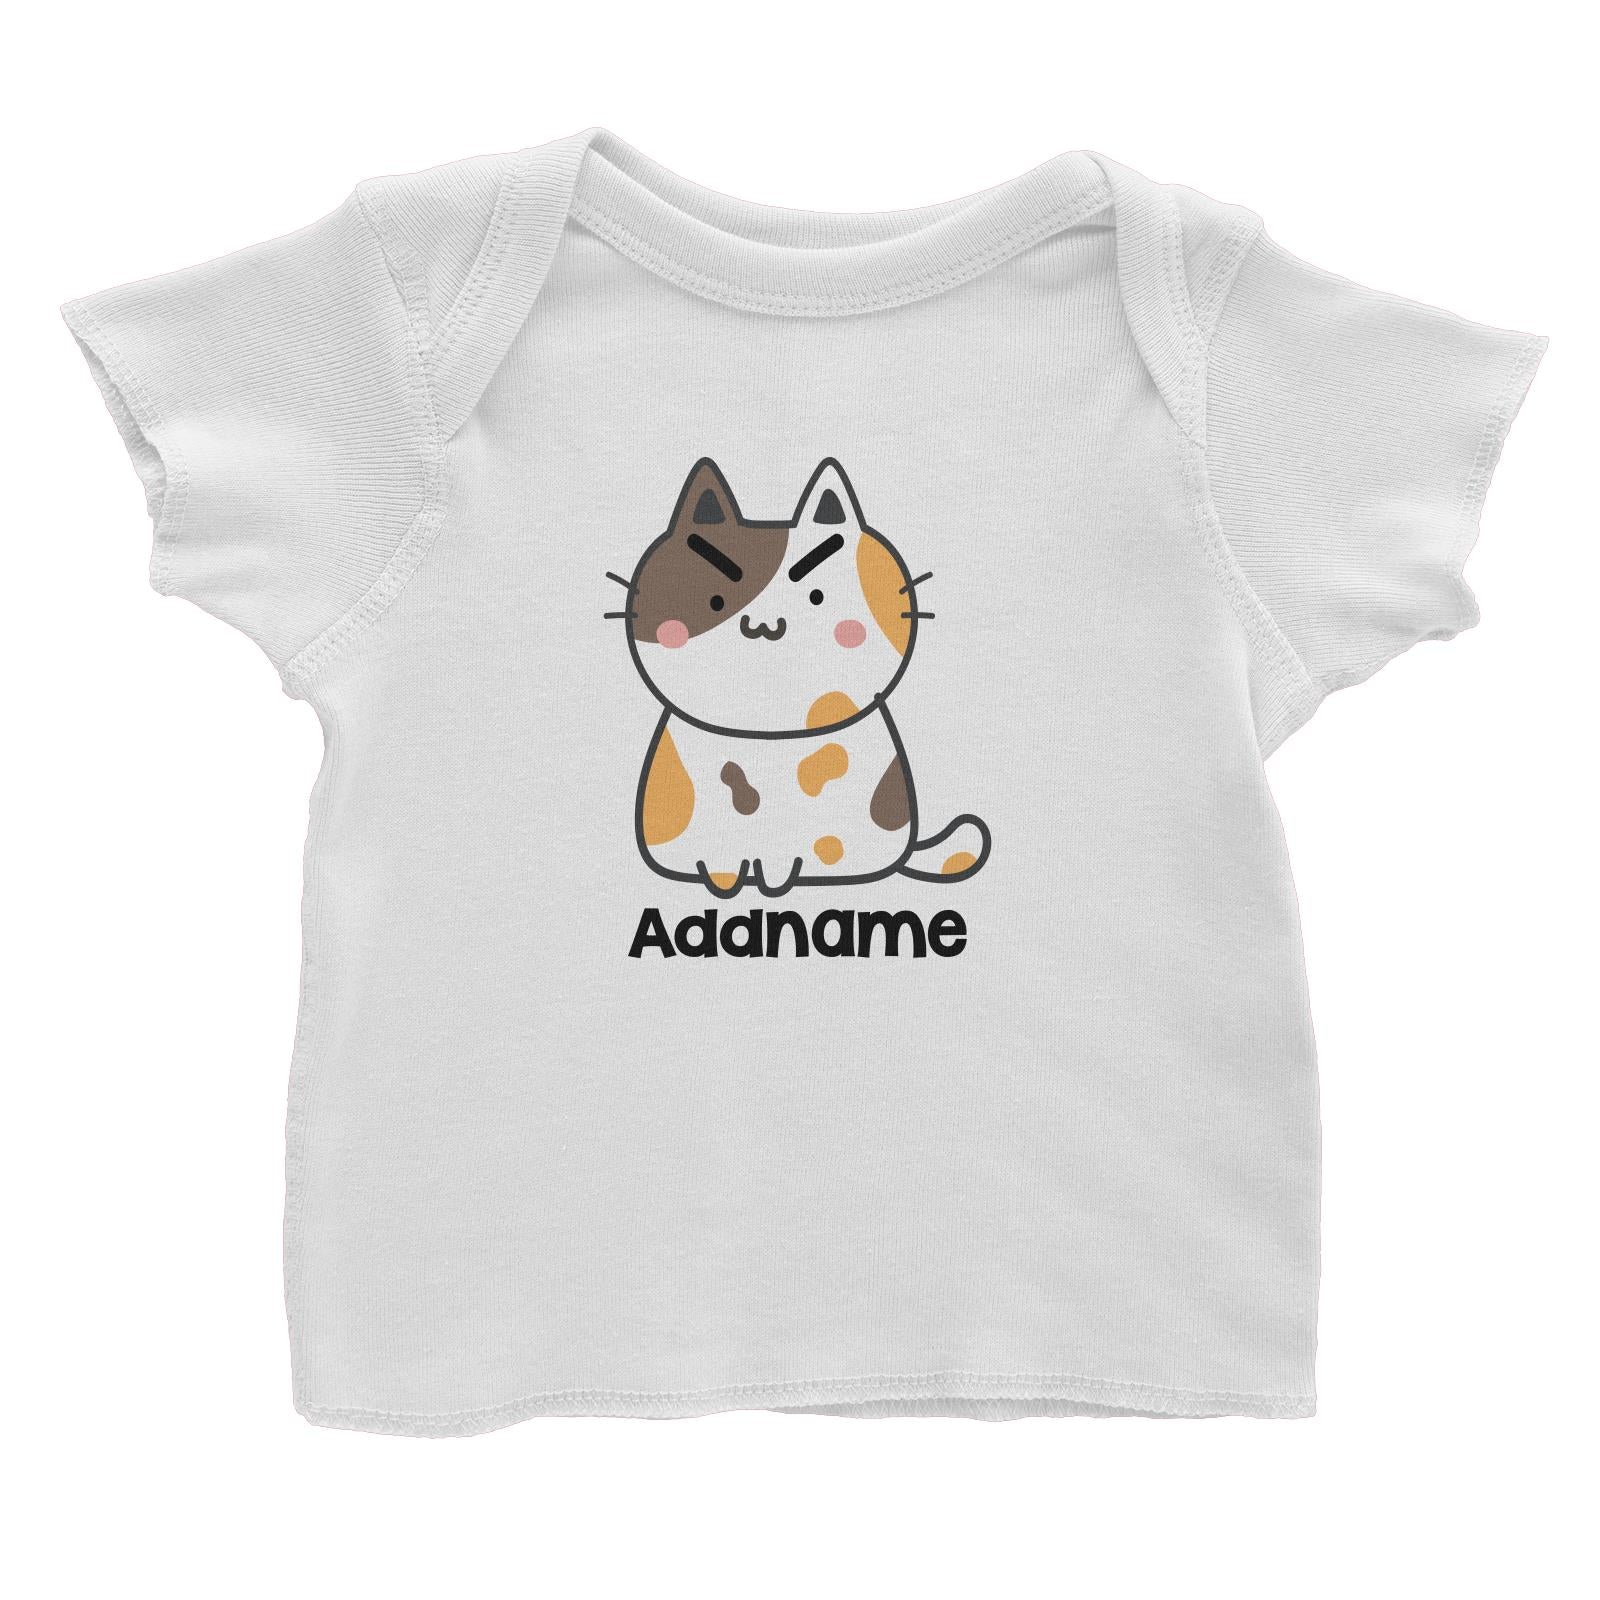 Drawn Adorable Cats Angry Cat Addname Baby T-Shirt